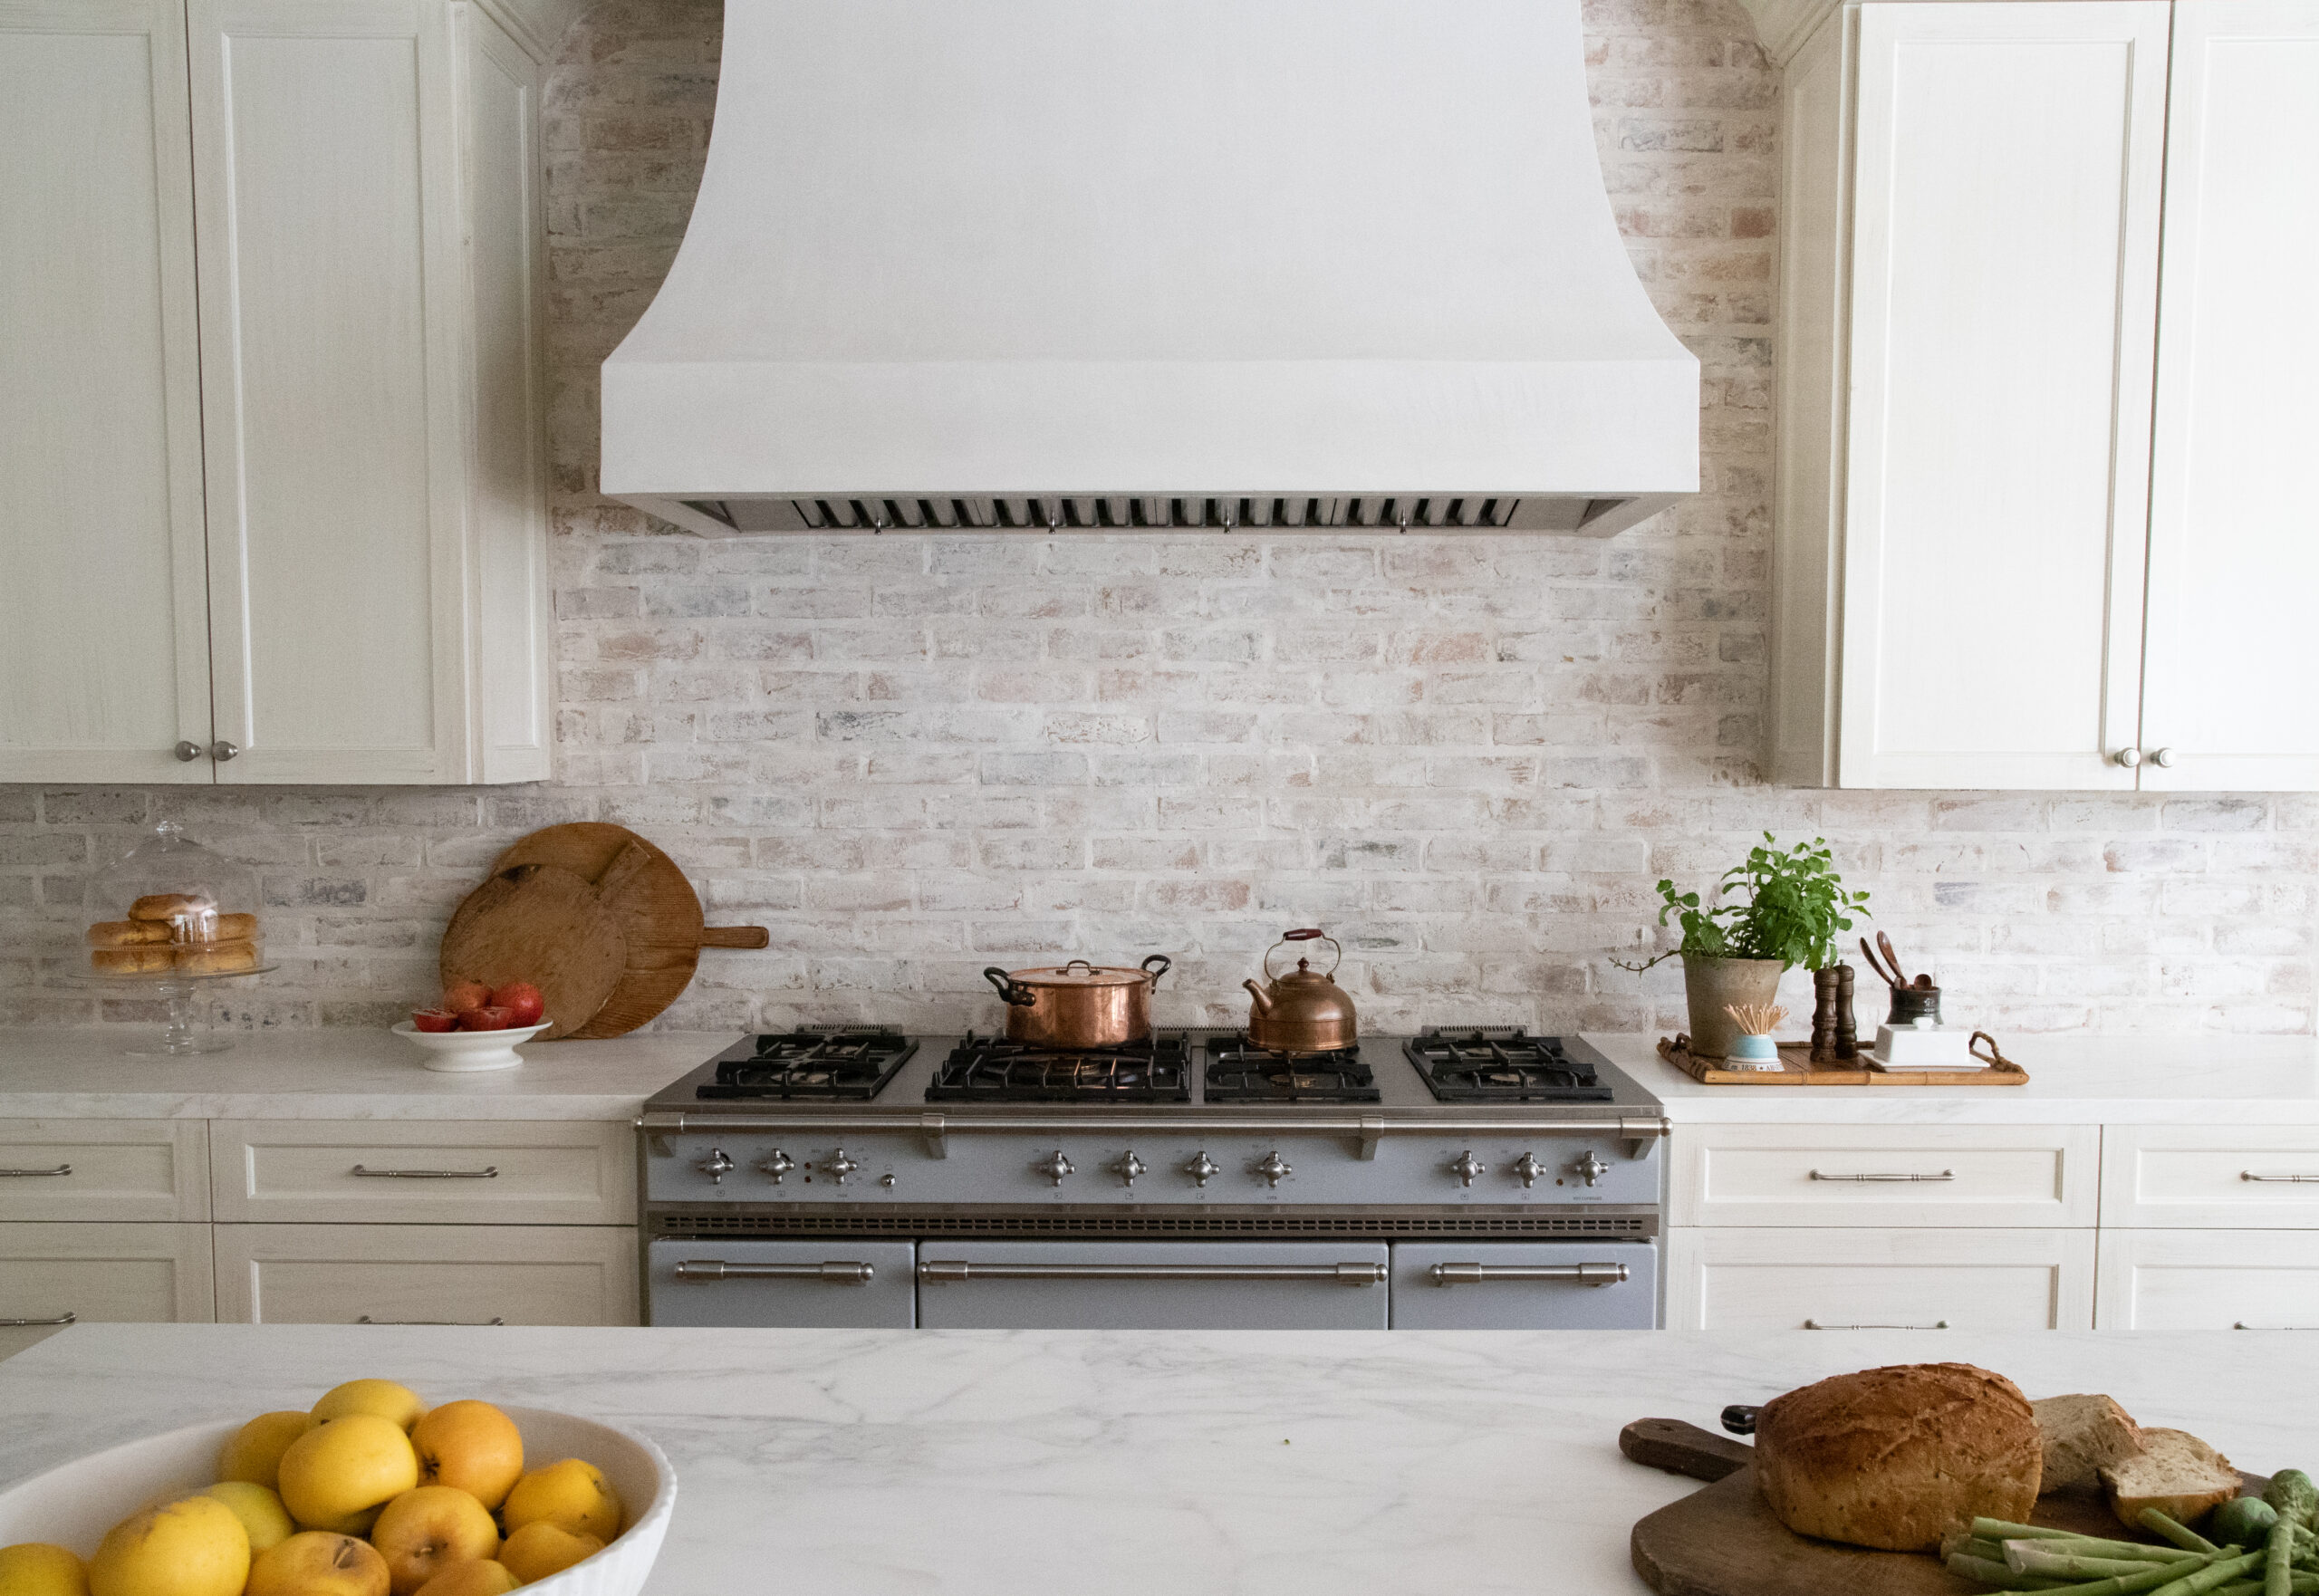 Vented vs. Non-Vented Range Hoods: Do You Need One Over Your Stove?